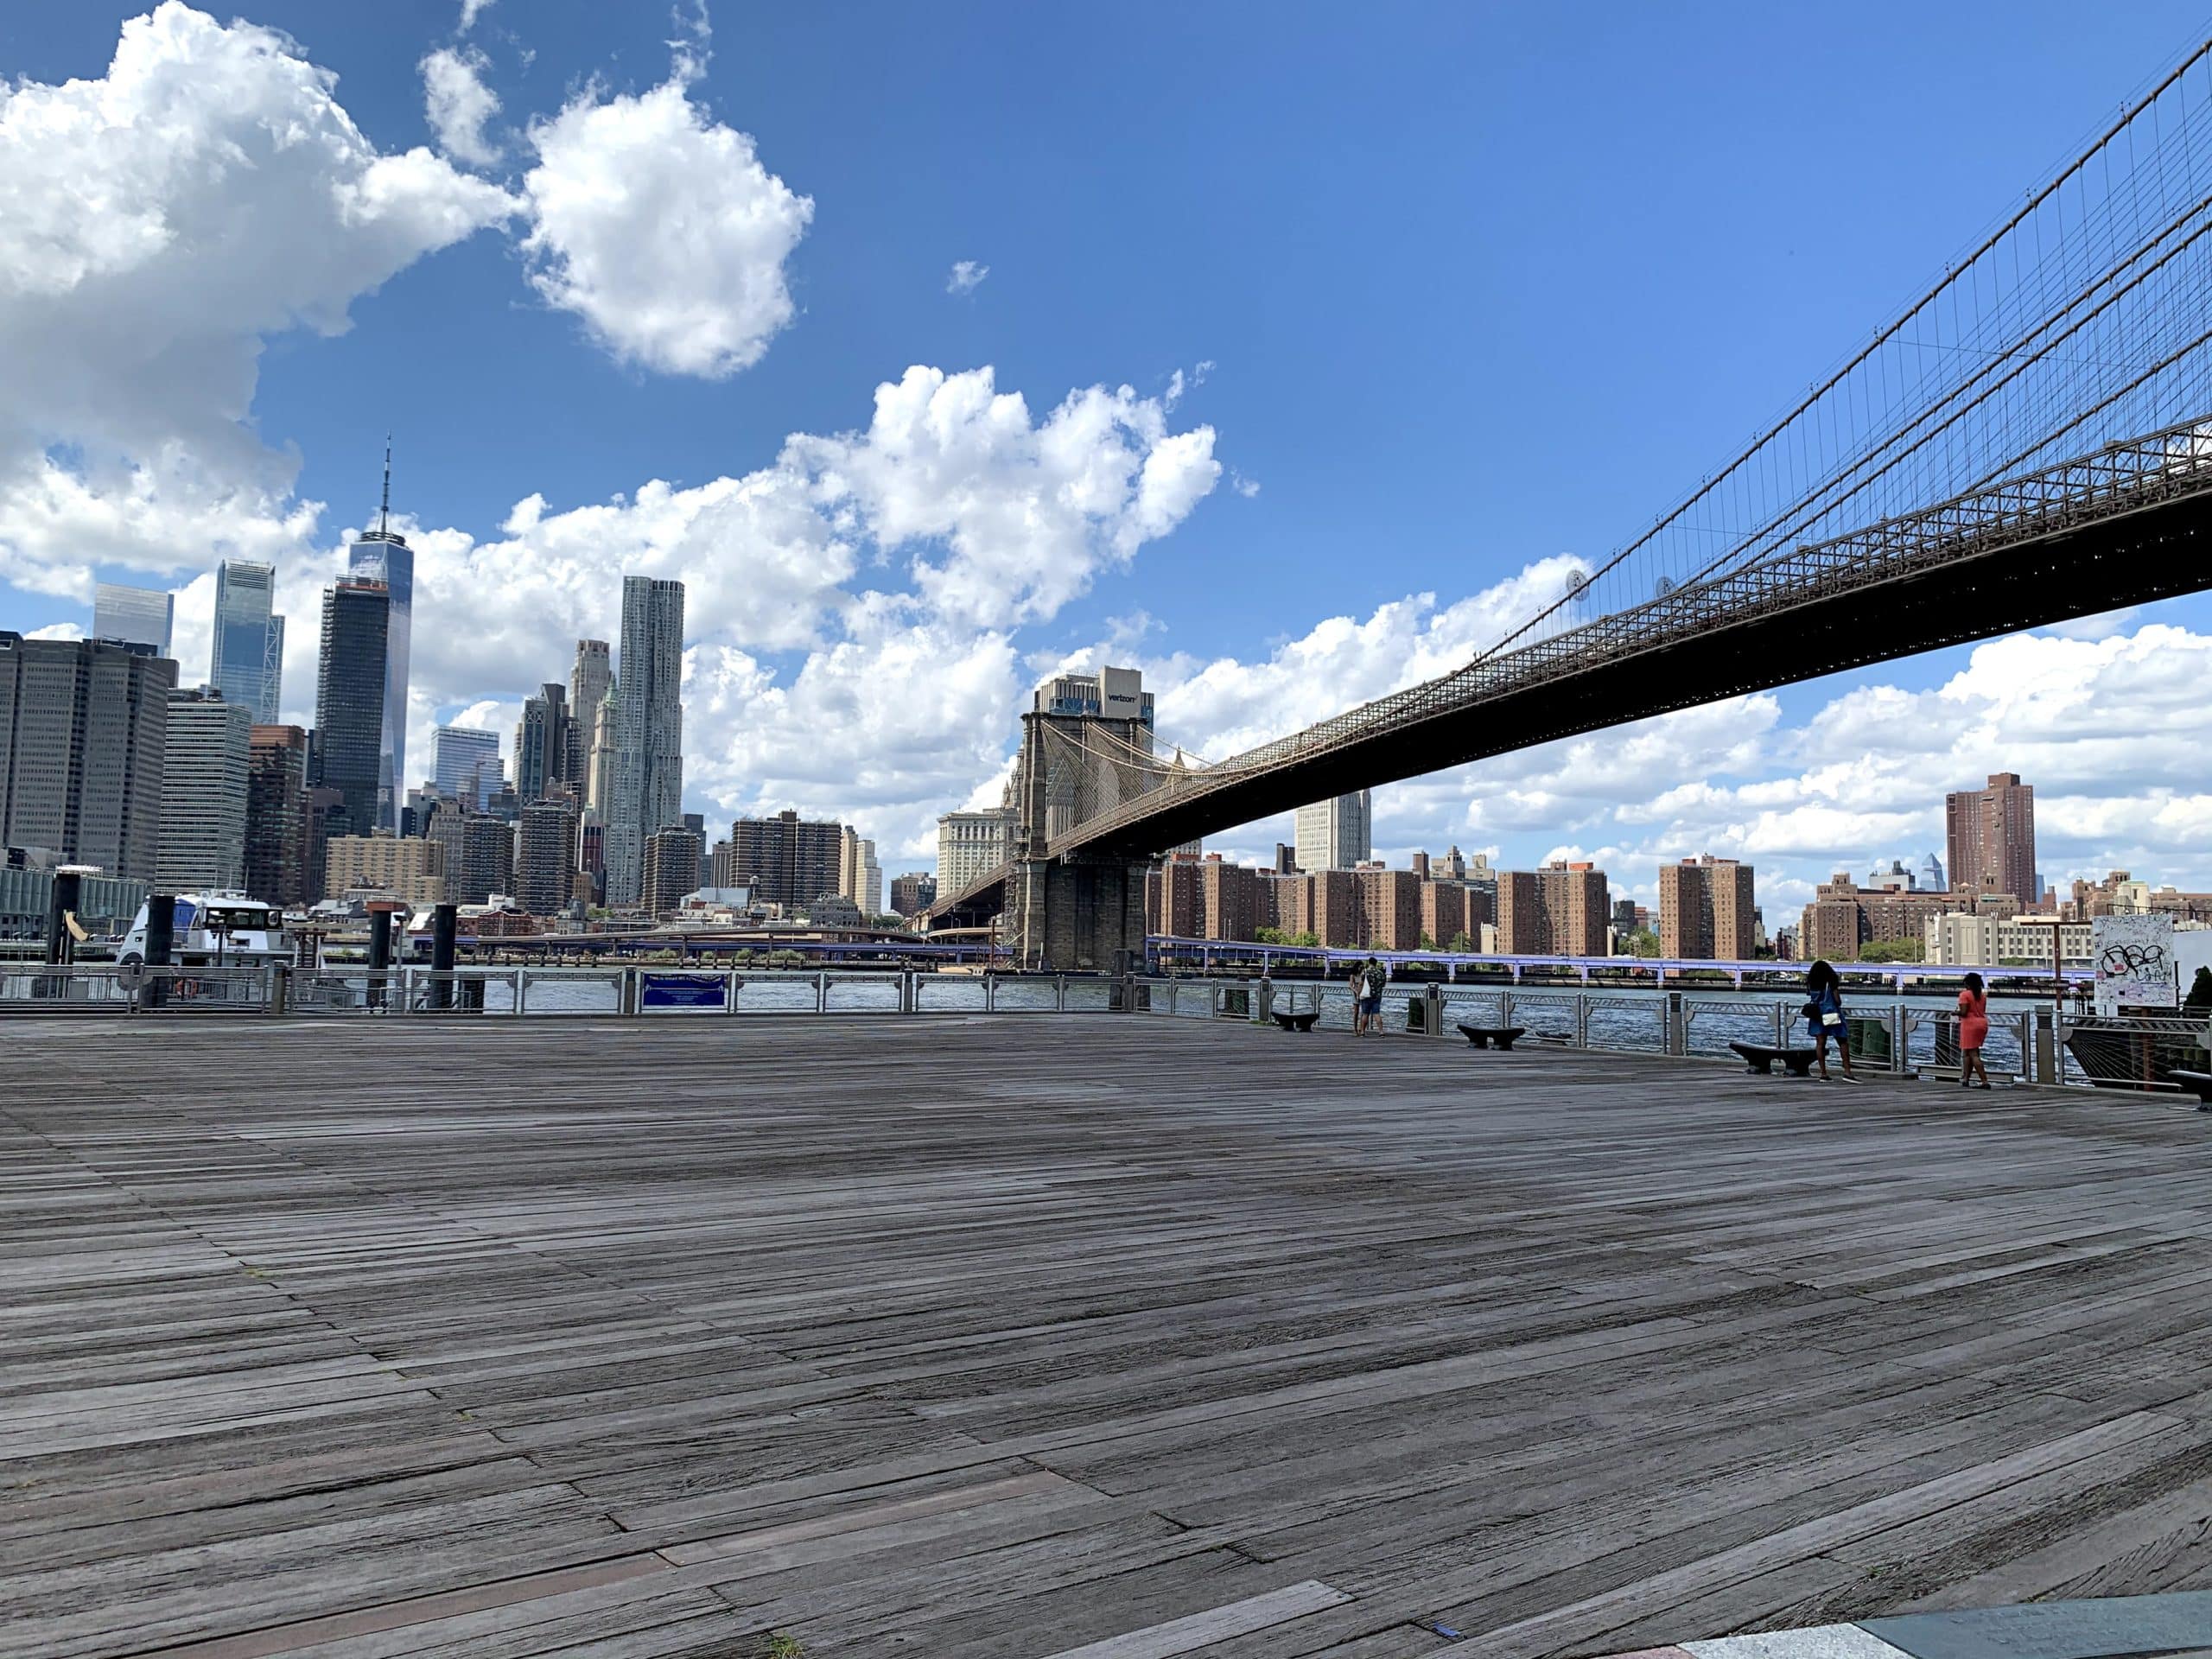 Fulton Ferry Landing boardwalk with views of the Brooklyn Bridge and lower Manhattan on a cloudy day.